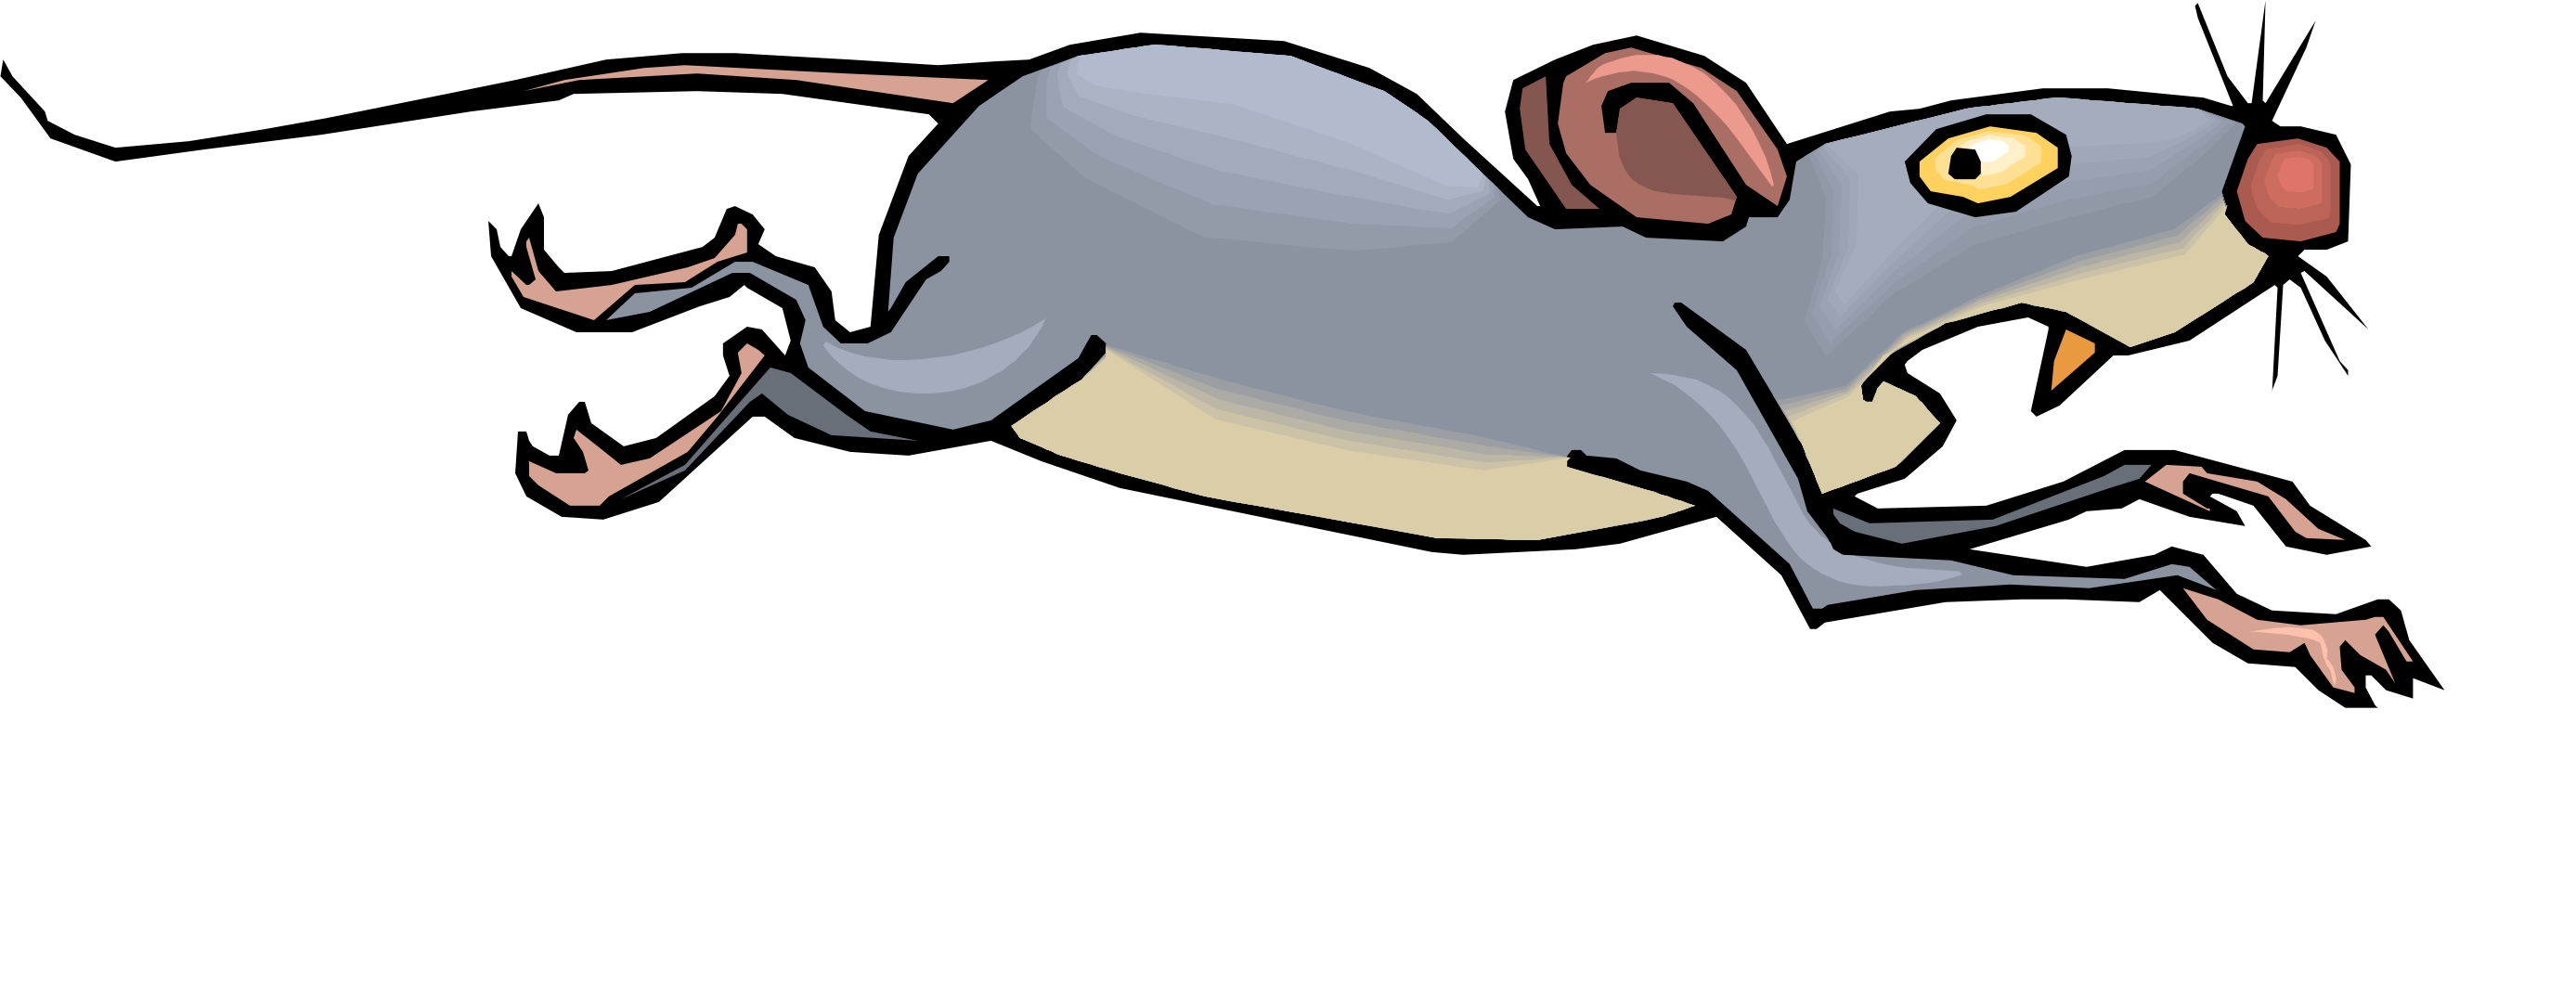 Cartoon Mouse Picture - Cliparts.co